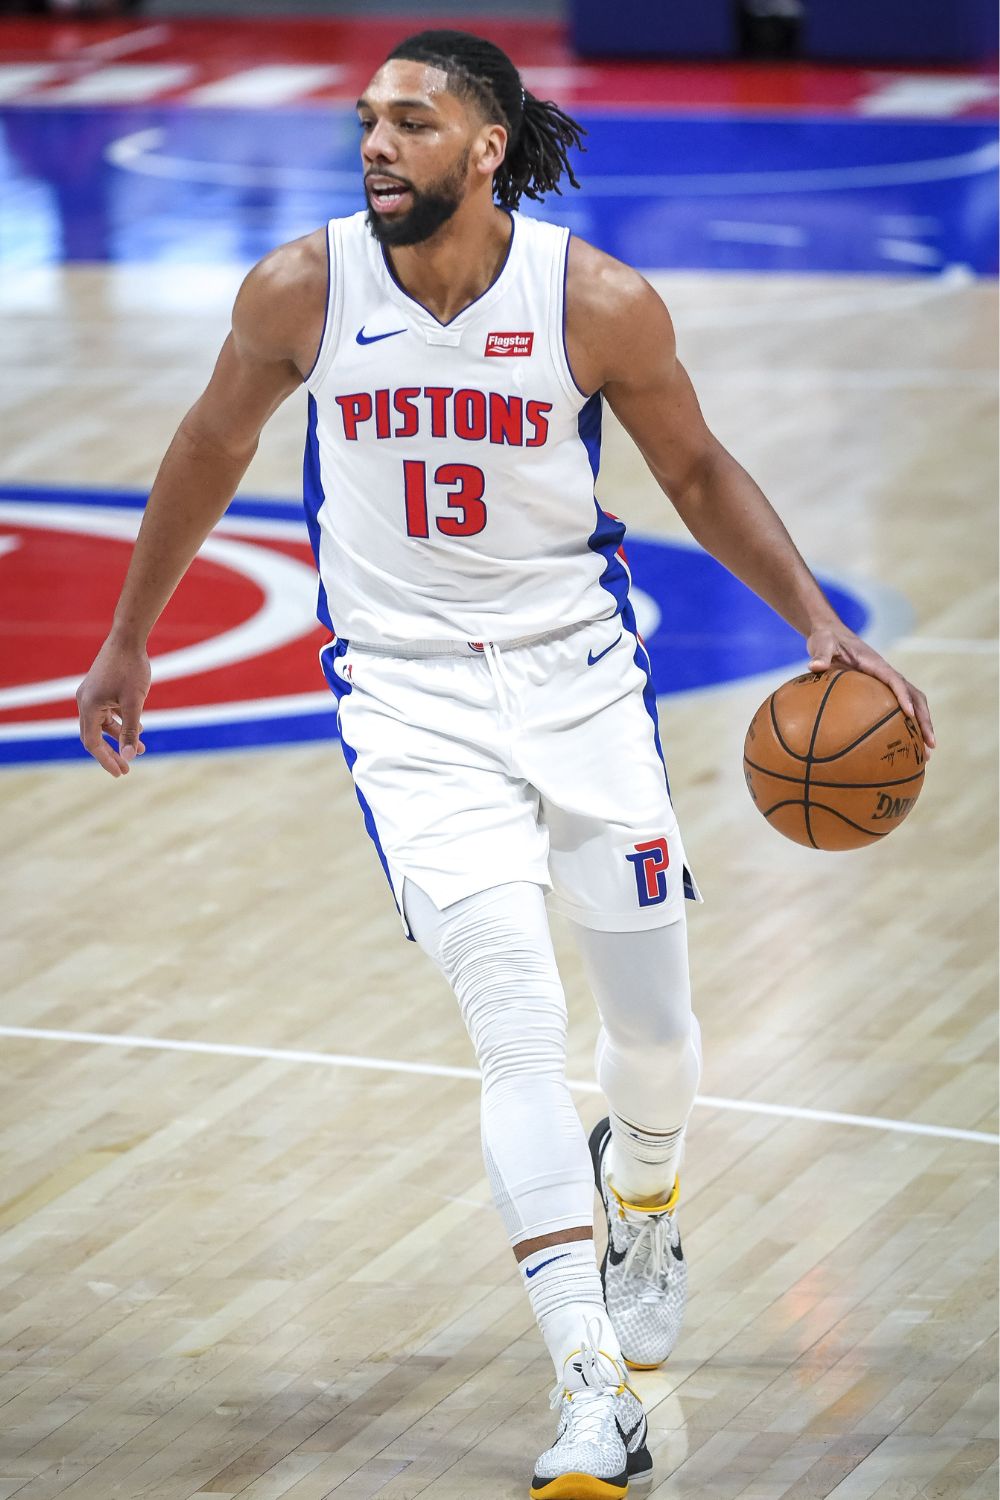 Jahlil Okafor Playing From Piston